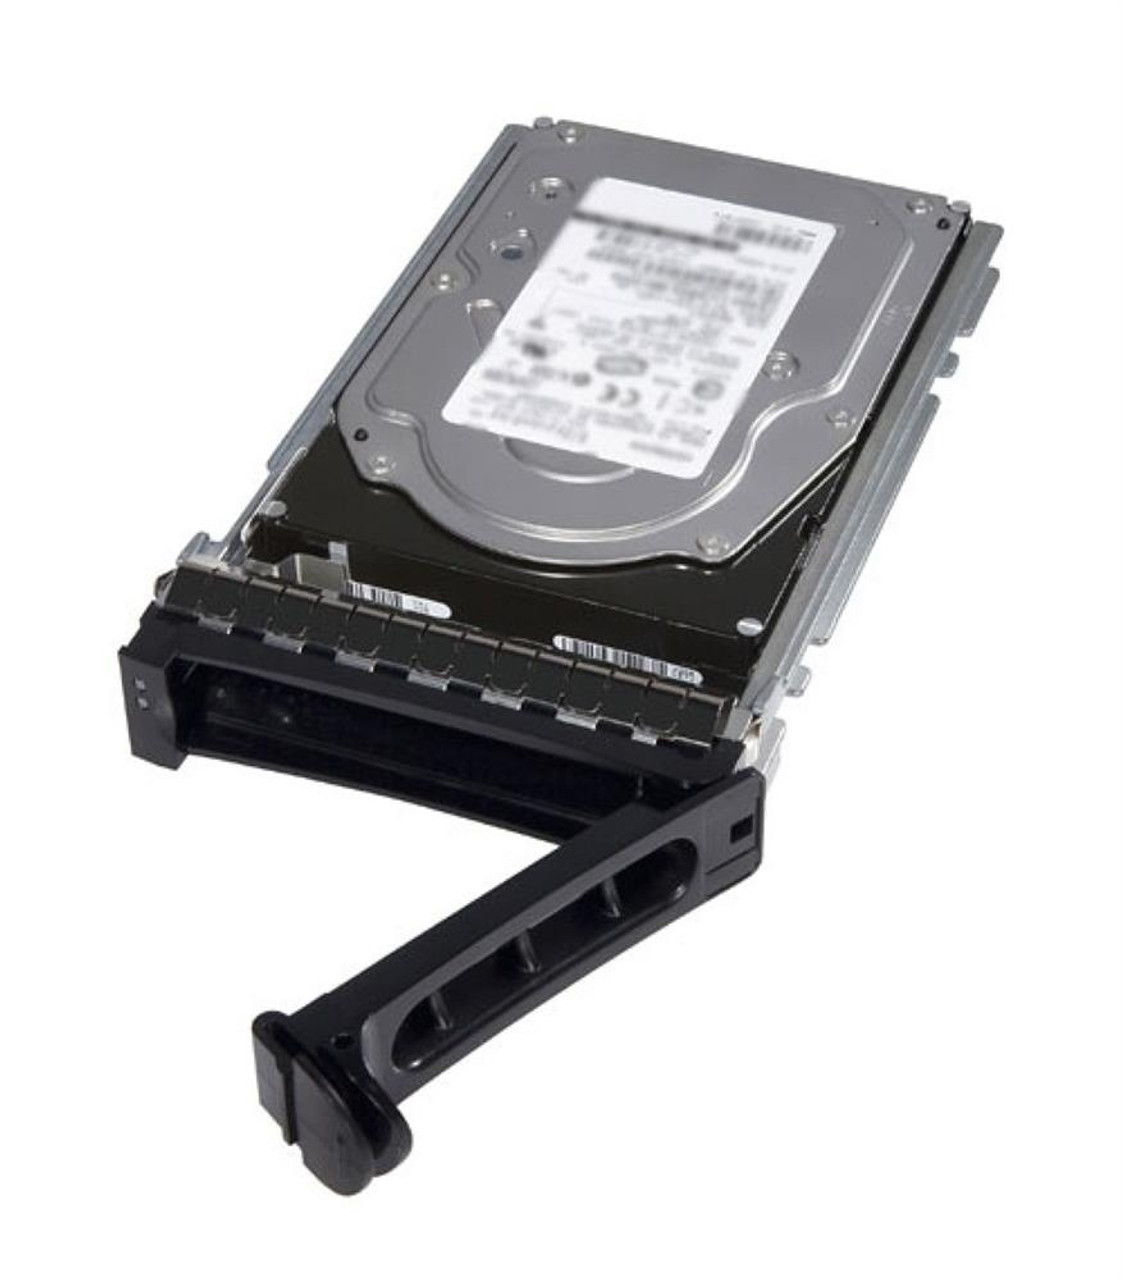 3R120-RFB Dell 73GB 15000RPM Ultra-320 SCSI 80-Pin Hot Swap 8MB Cache 3.5-inch Internal Hard Drive with Tray